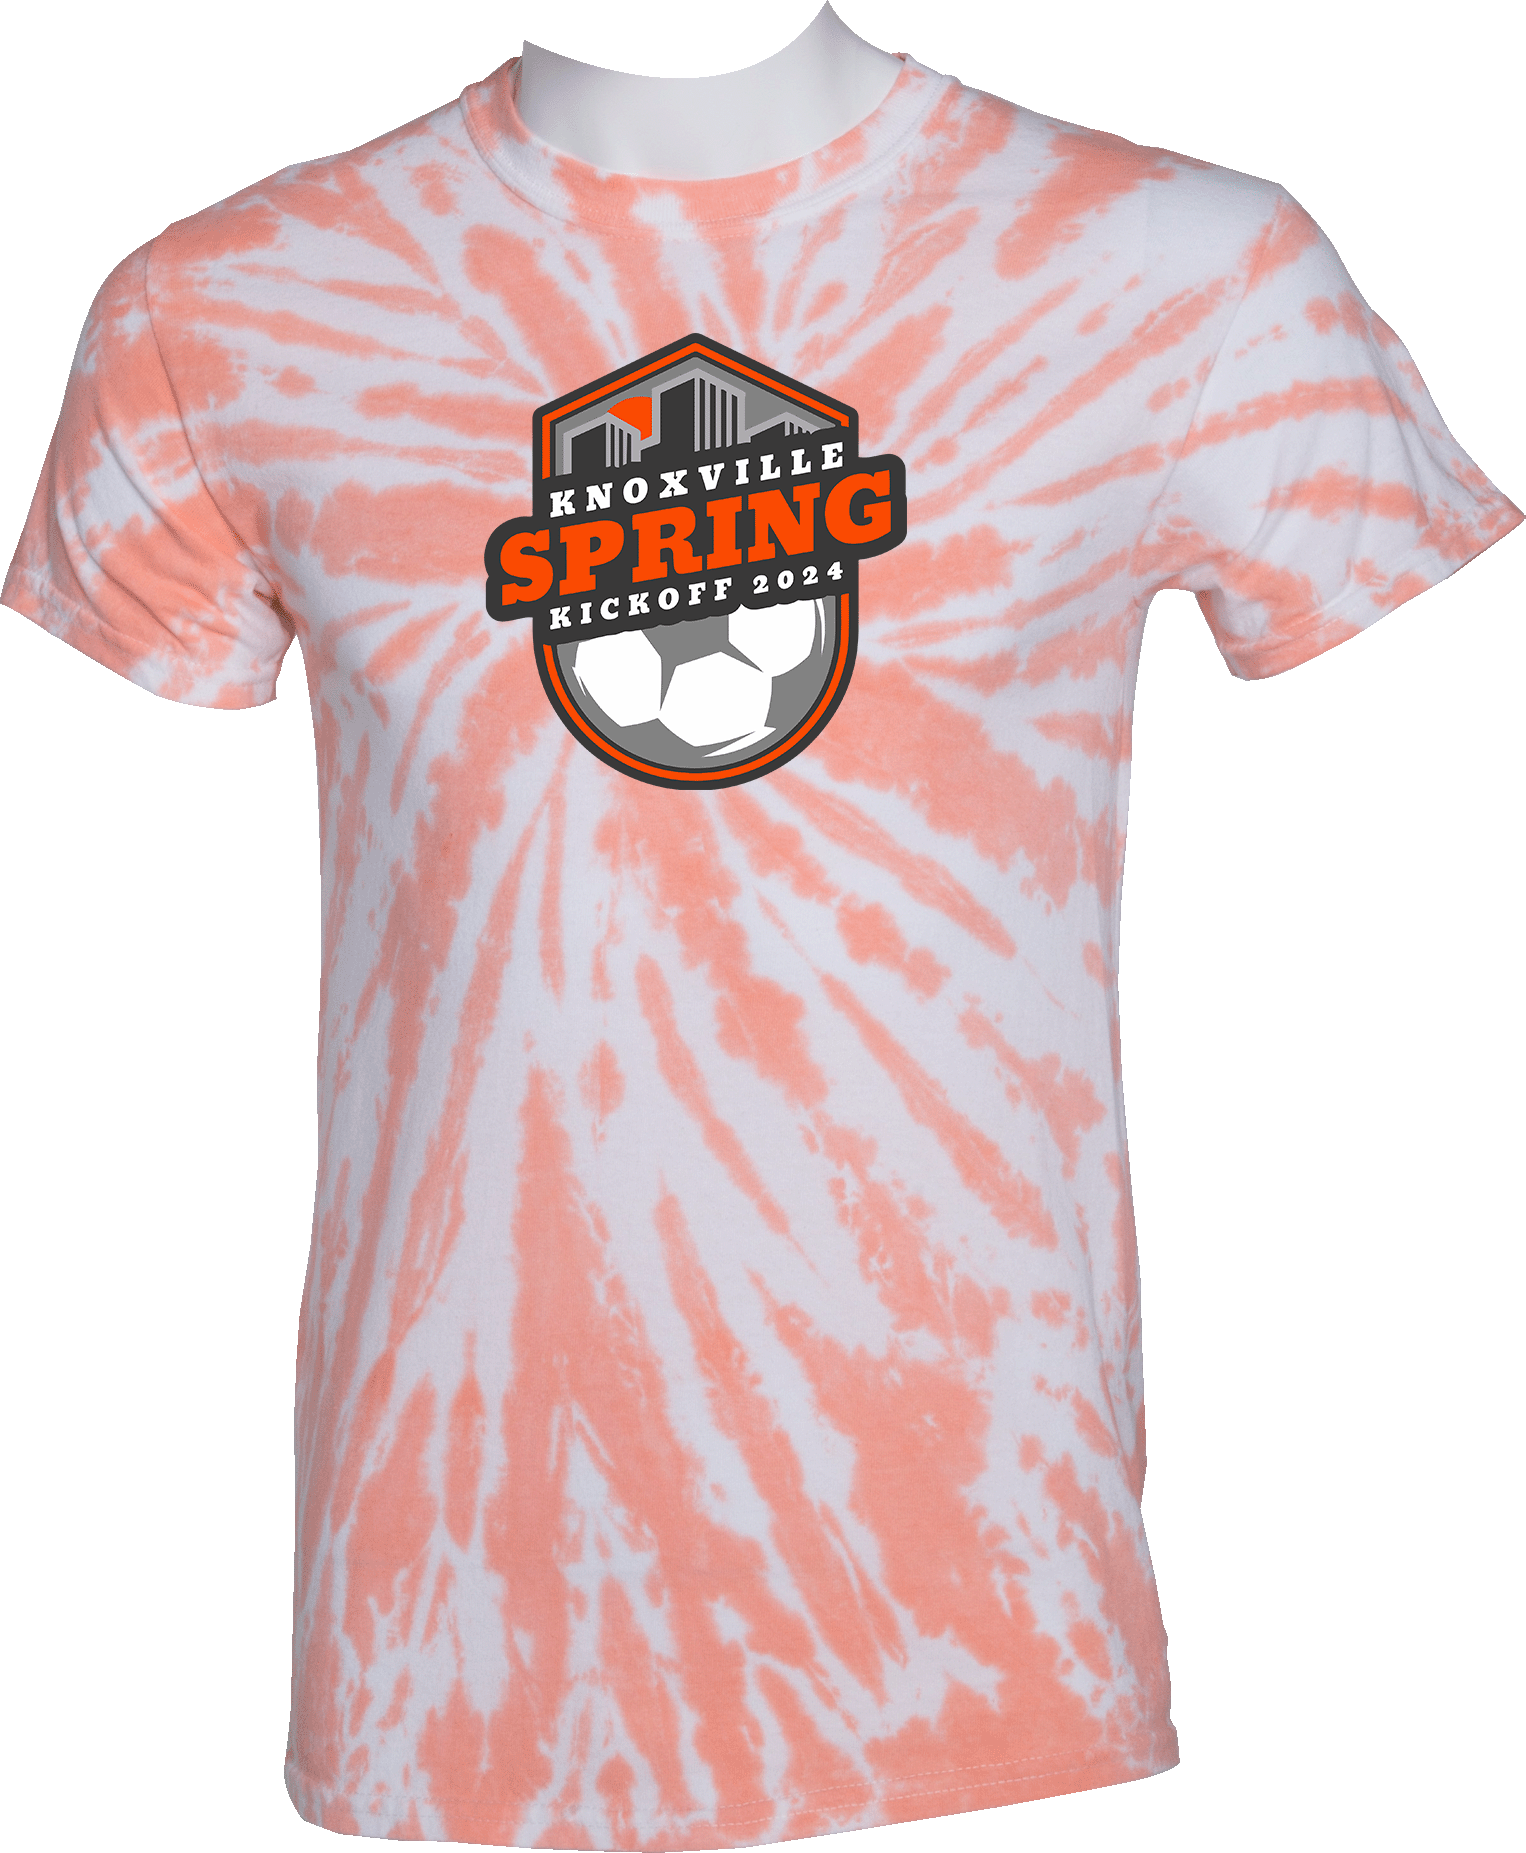 Tie-Dye Short Sleeves - 2024 Knoxville Spring Kickoff